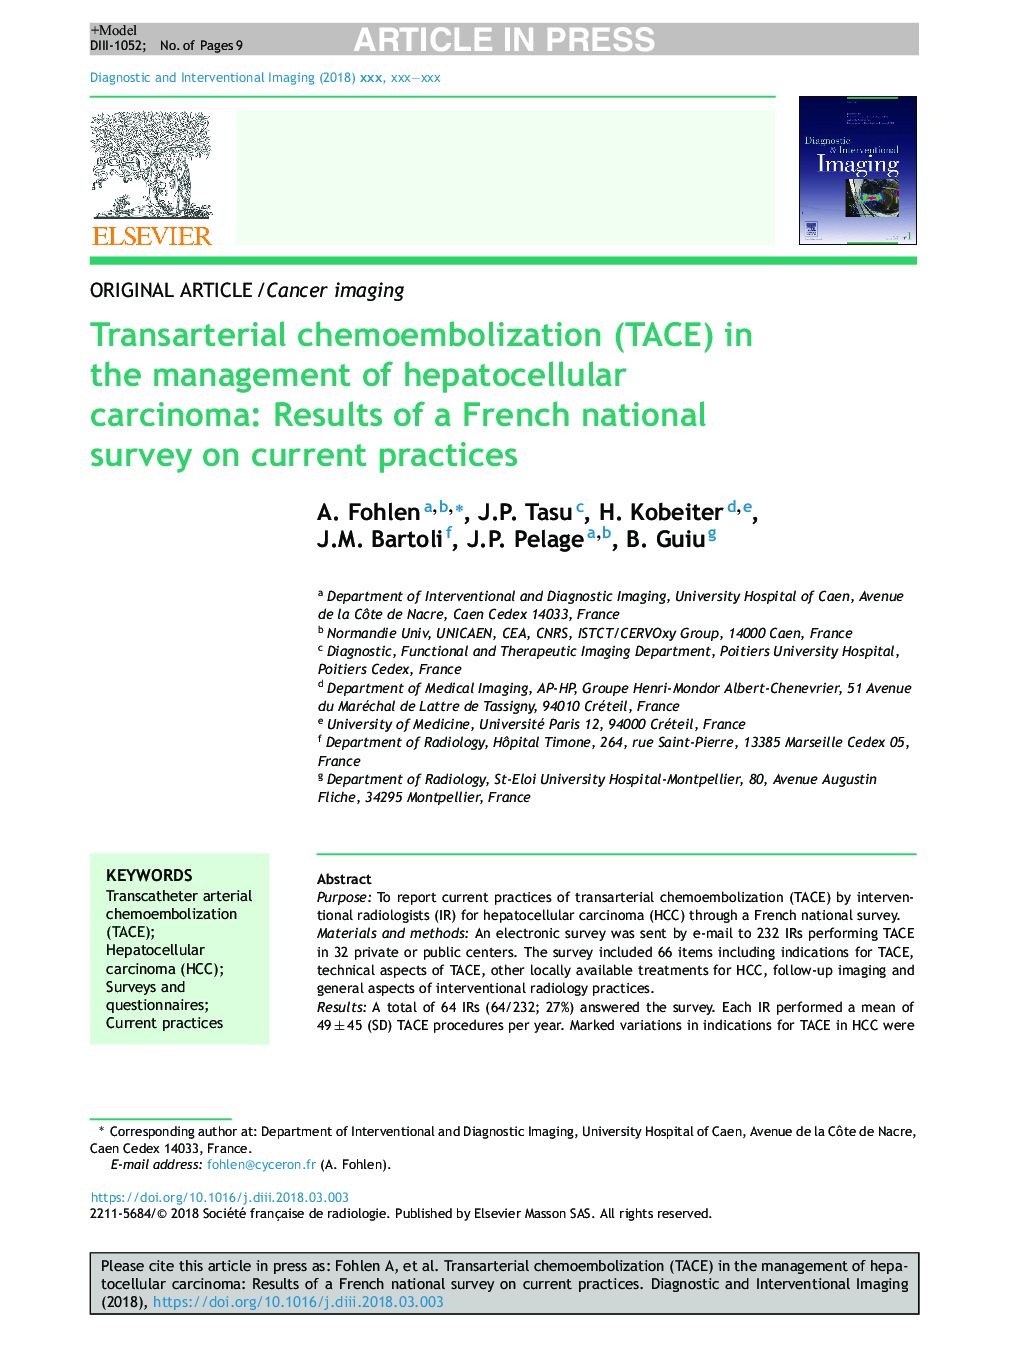 Transarterial chemoembolization (TACE) in the management of hepatocellular carcinoma: Results of a French national survey on current practices